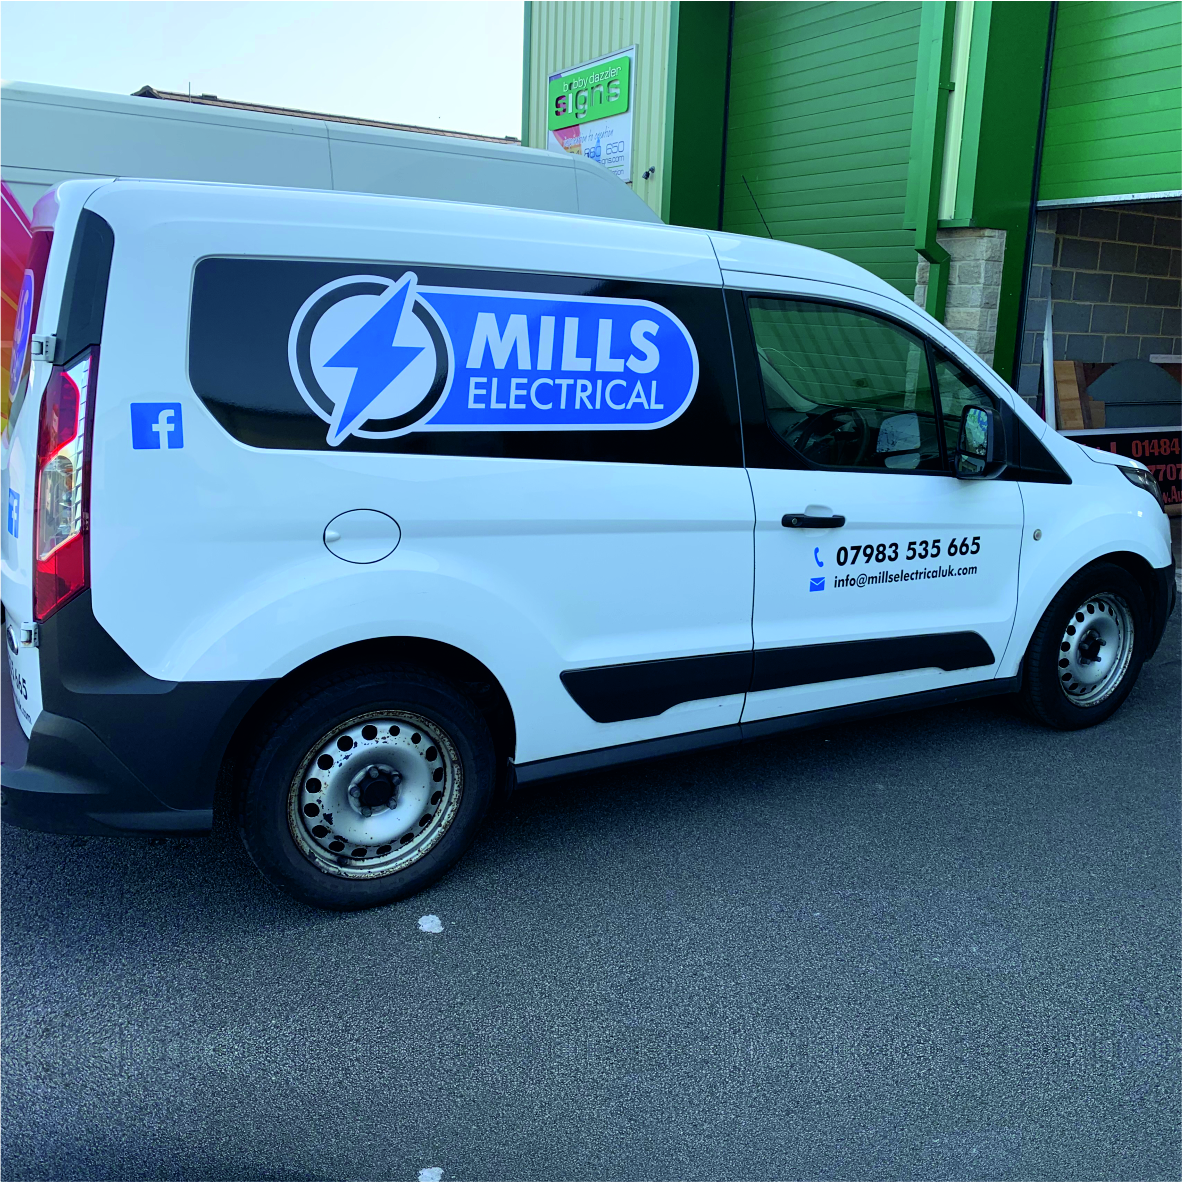 Mill Electrical Vehicle graphics livery